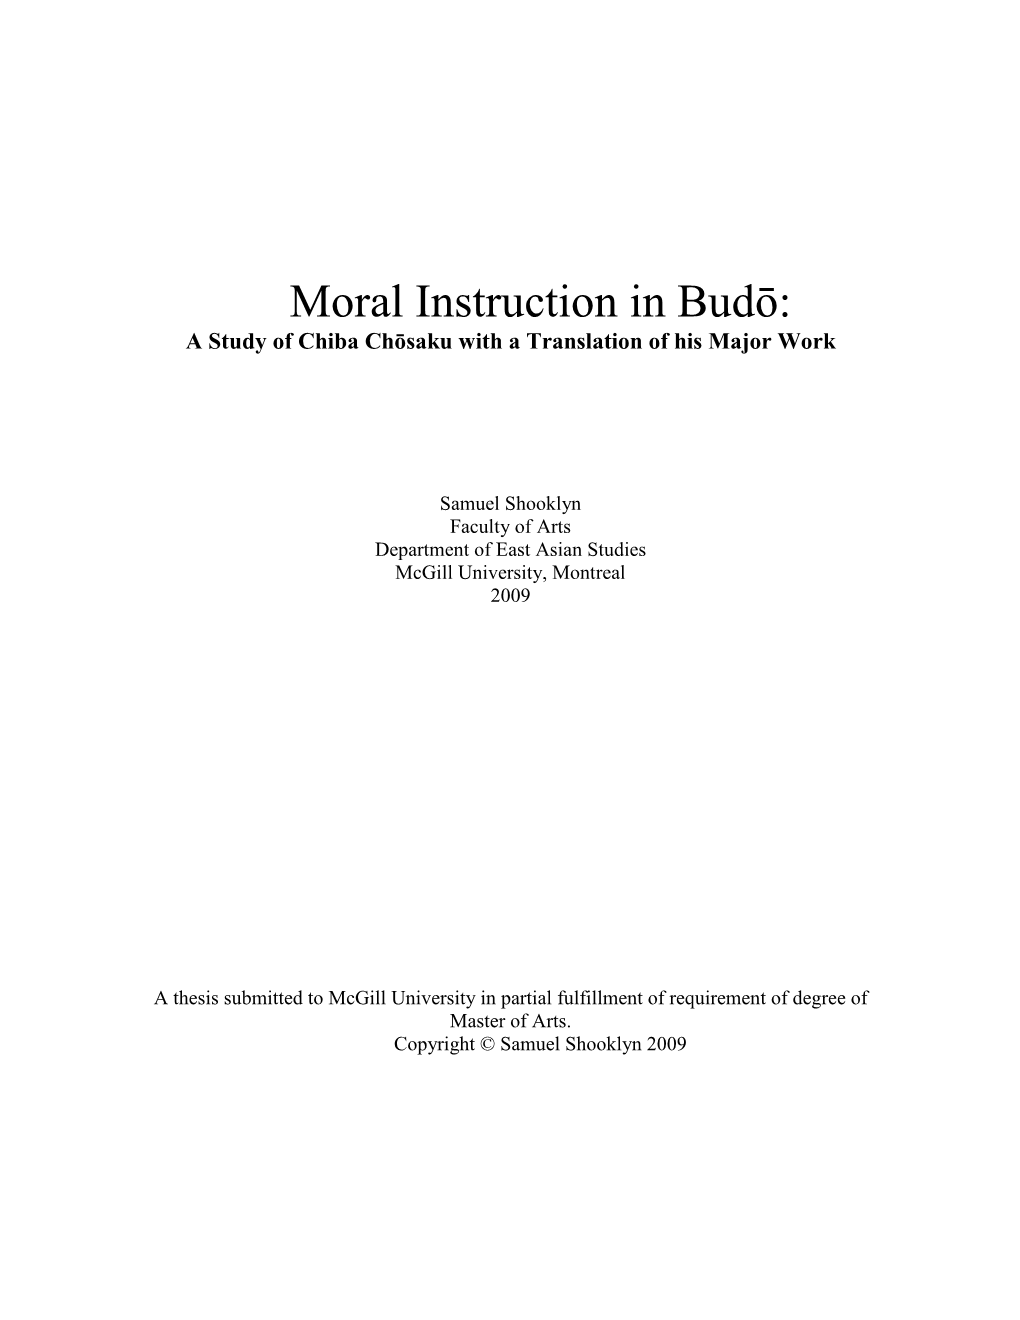 Moral Instruction in Budō: a Study of Chiba Chōsaku with a Translation of His Major Work